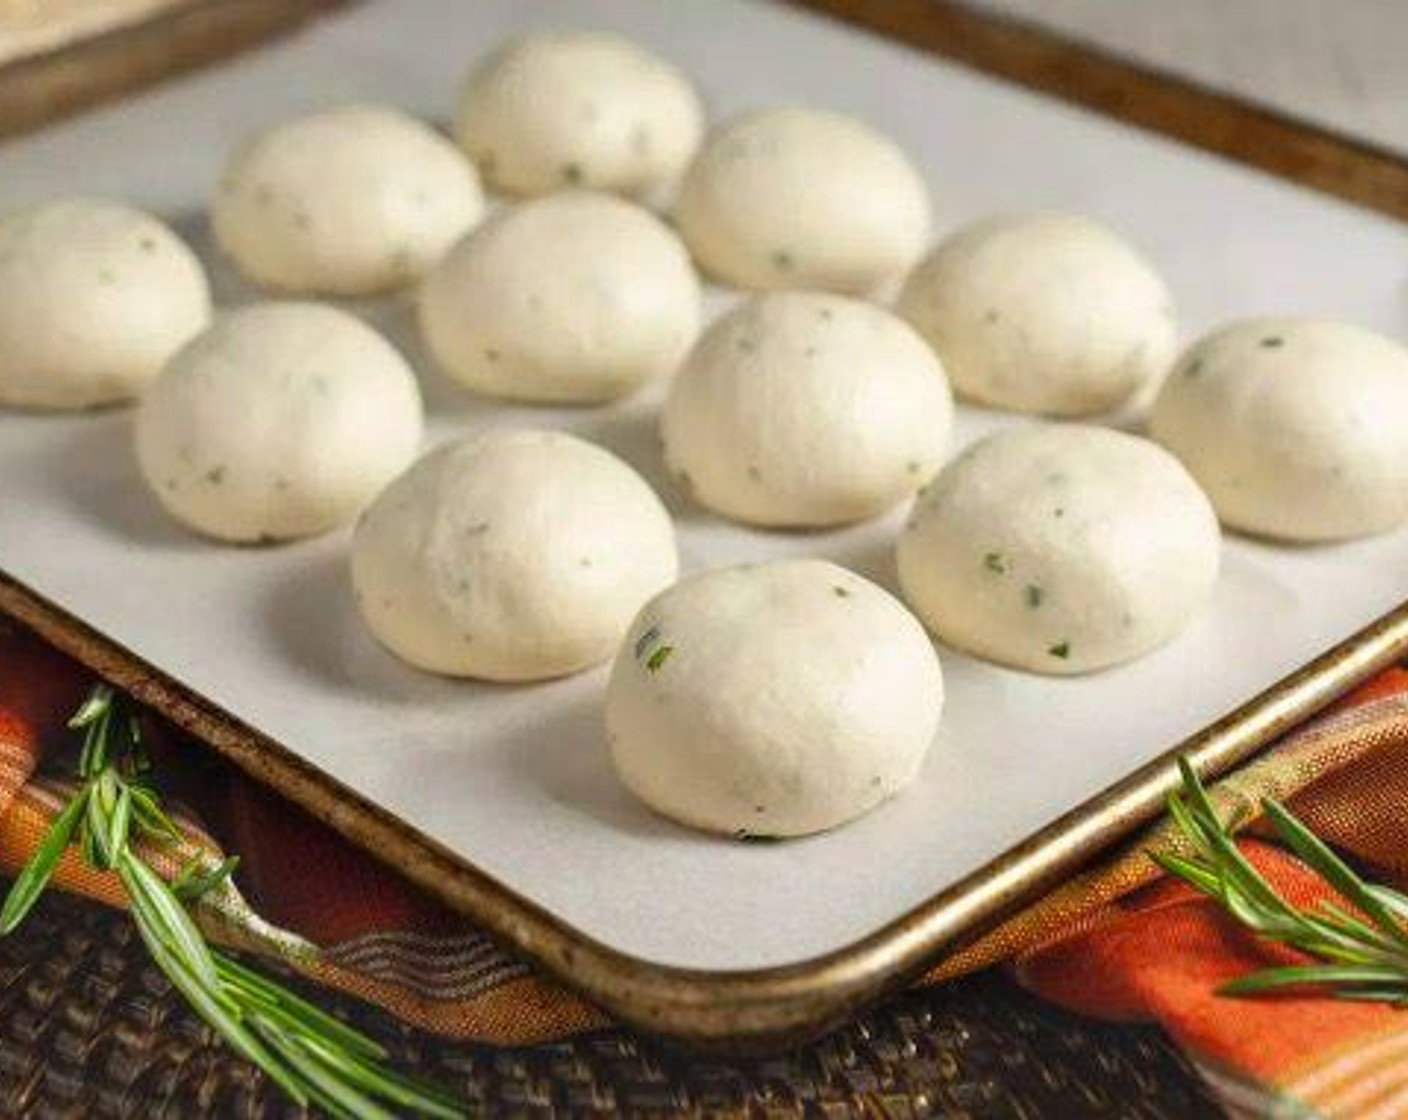 step 8 Divide dough into 12 equal portions of 55-58 grams each. Roll into balls and place on a parchment lined baking tray 1/4-inch apart. Cover with oiled plastic wrap or kitchen towel and allow to rise for 45 minutes.